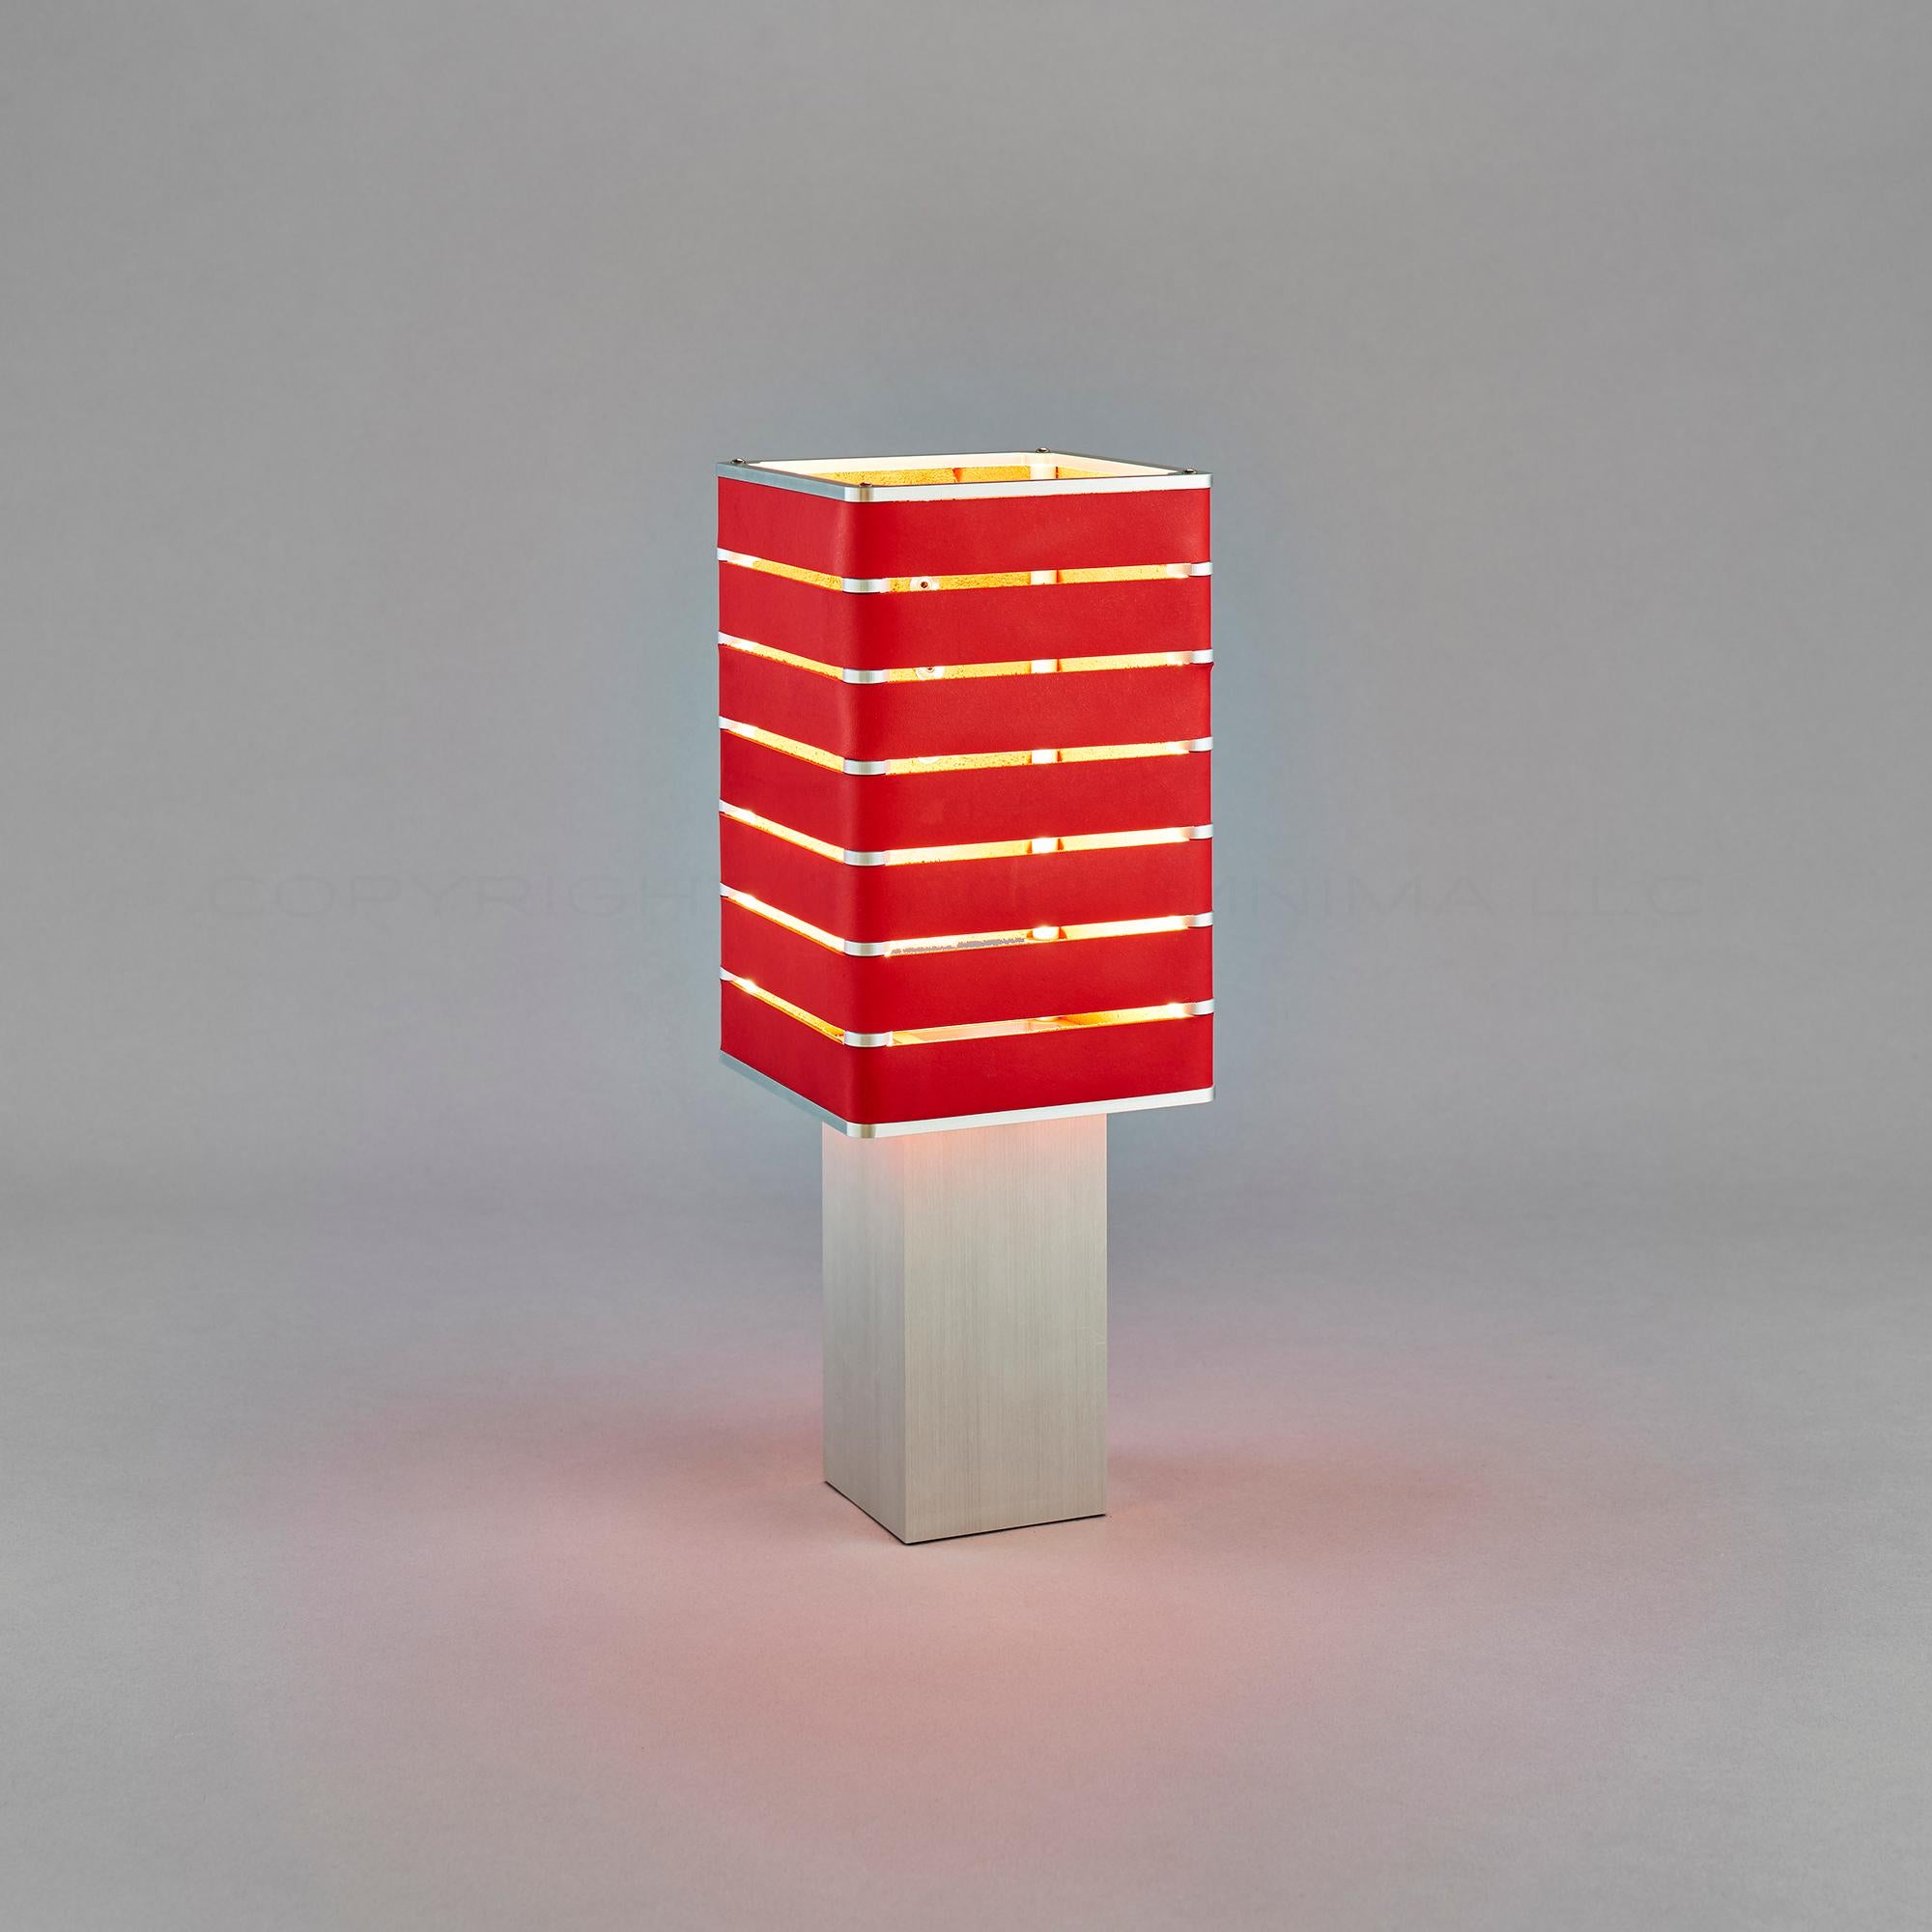 Anodized Modern, Minimal, Solid Metal Table Light in M. Fiesta Red Italian Leather